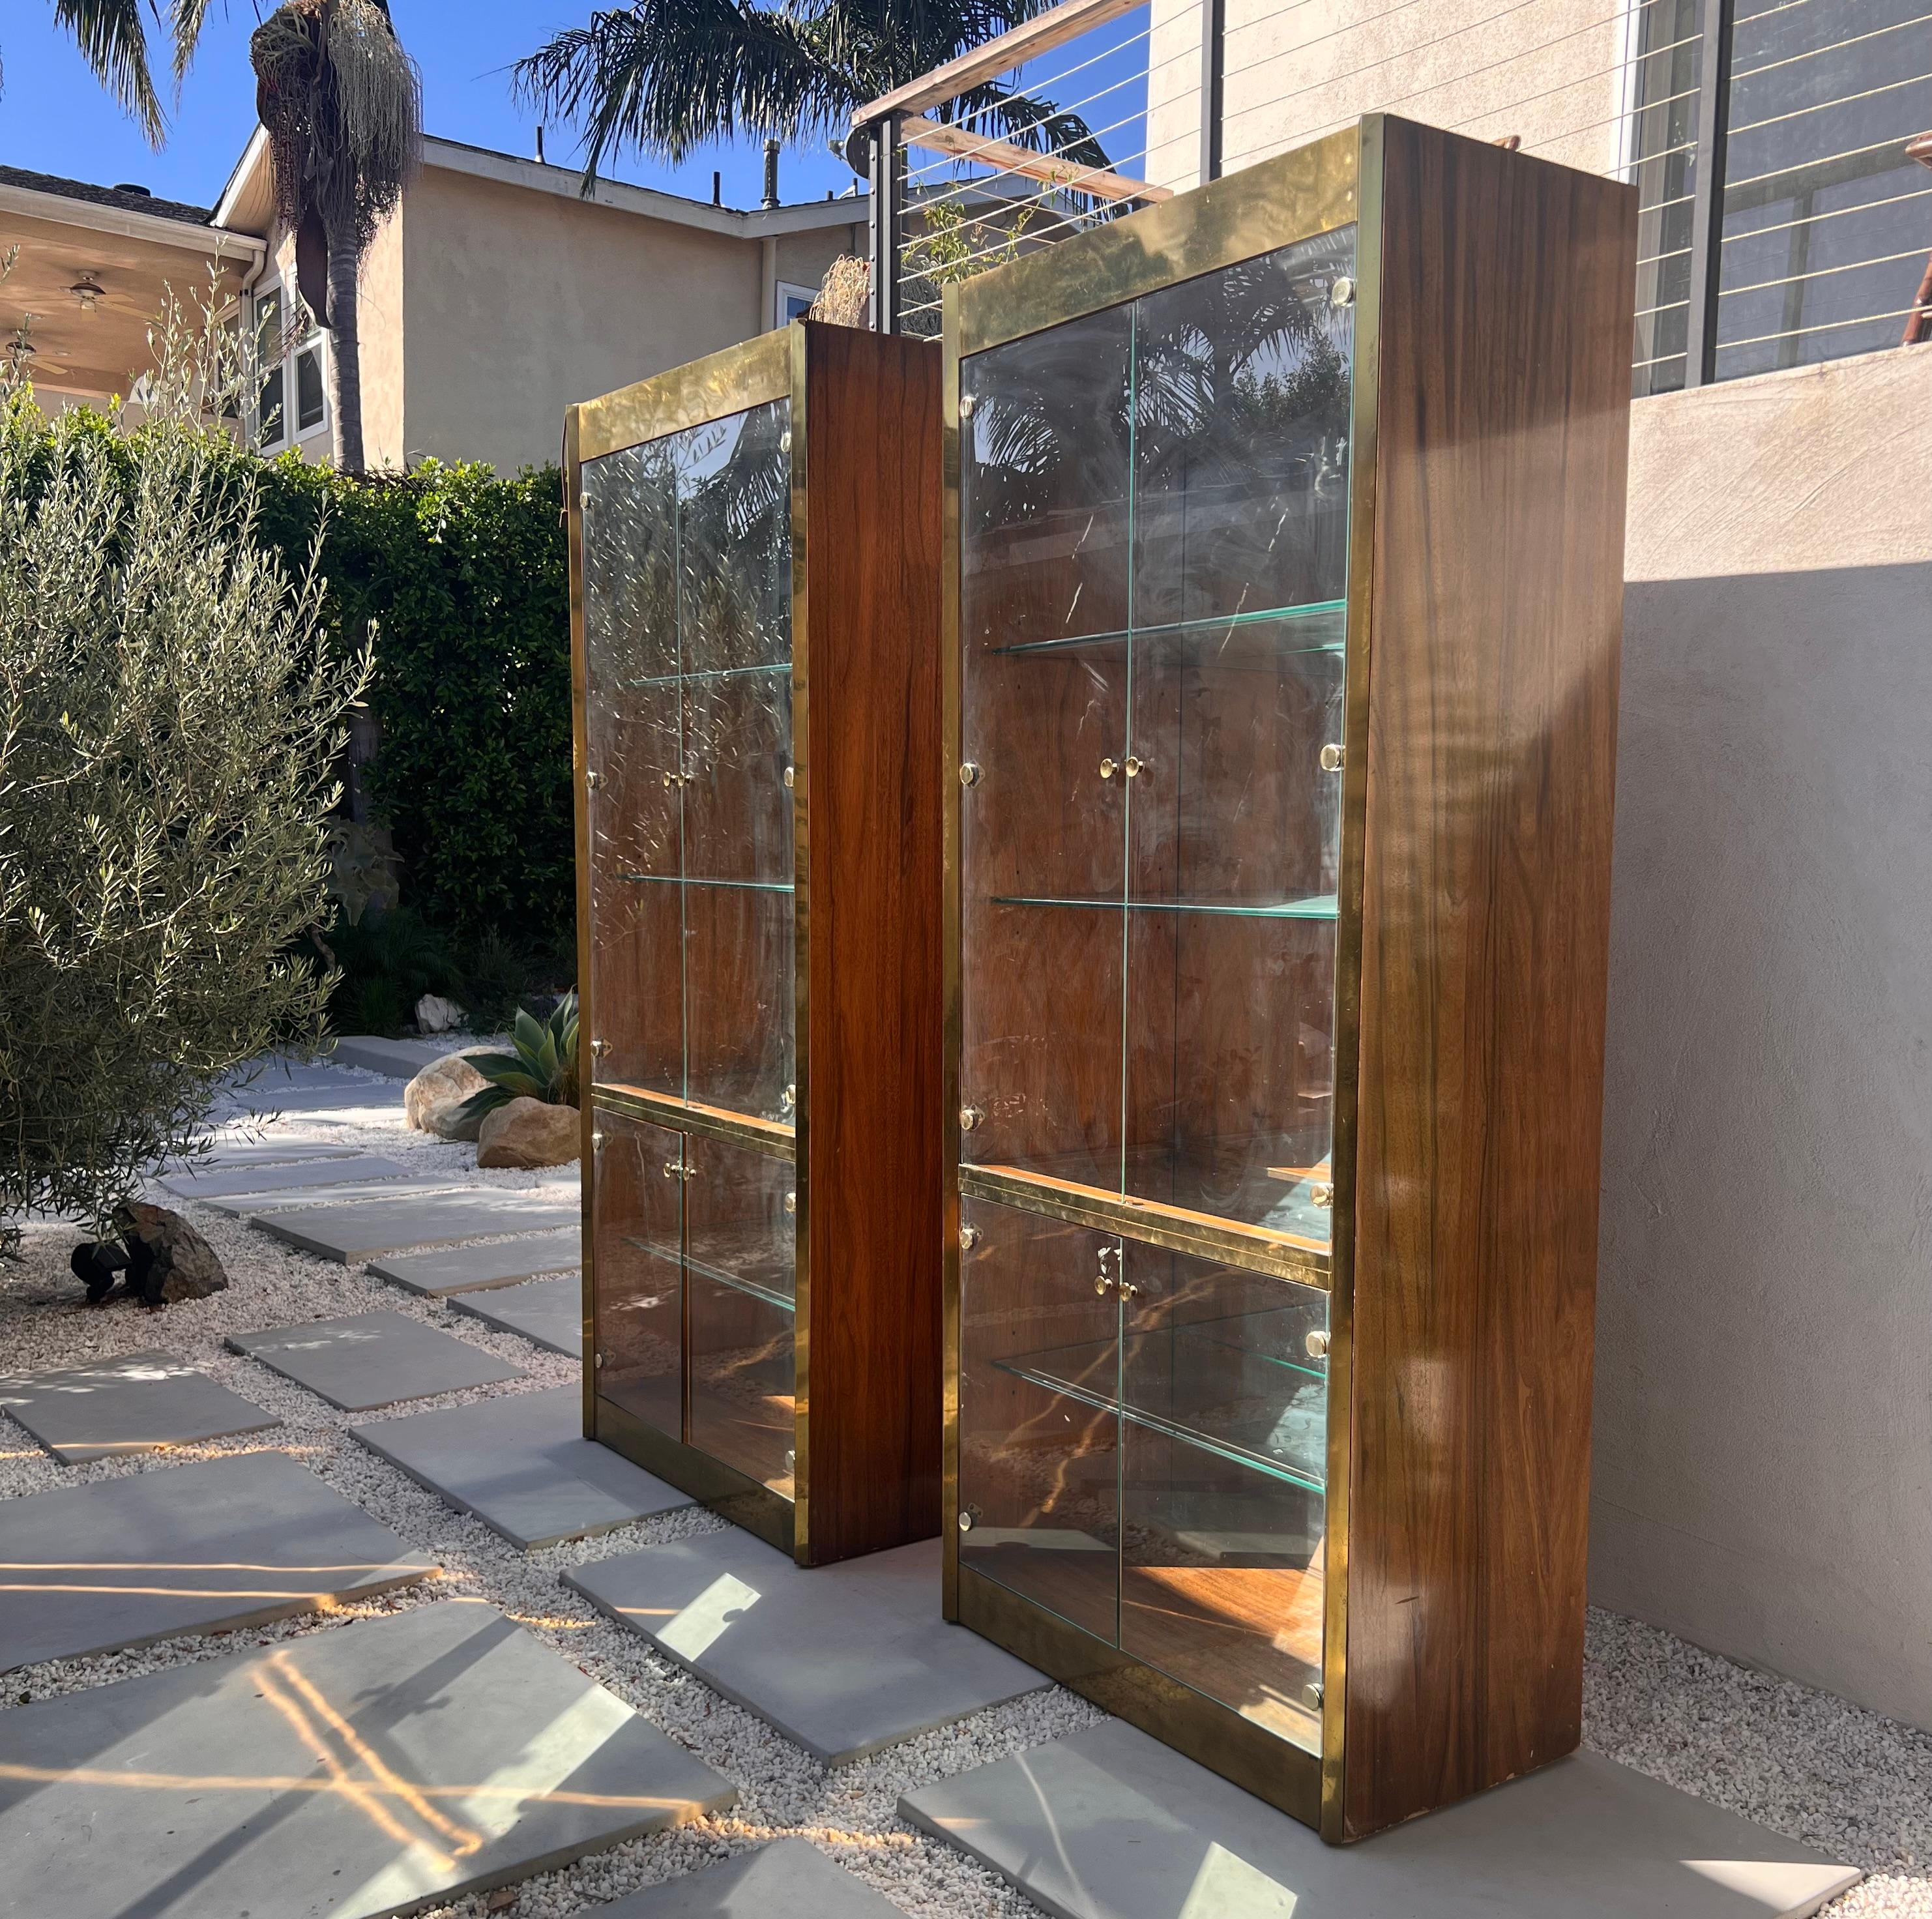 A pair of mid century modern monumental étagères / display case cabinets by Mastercraft, circa early 1970s. Wood with brass detailing and hardware and featuring mirrored backs and glass shelves, as well as lights on the interior of the ceiling of